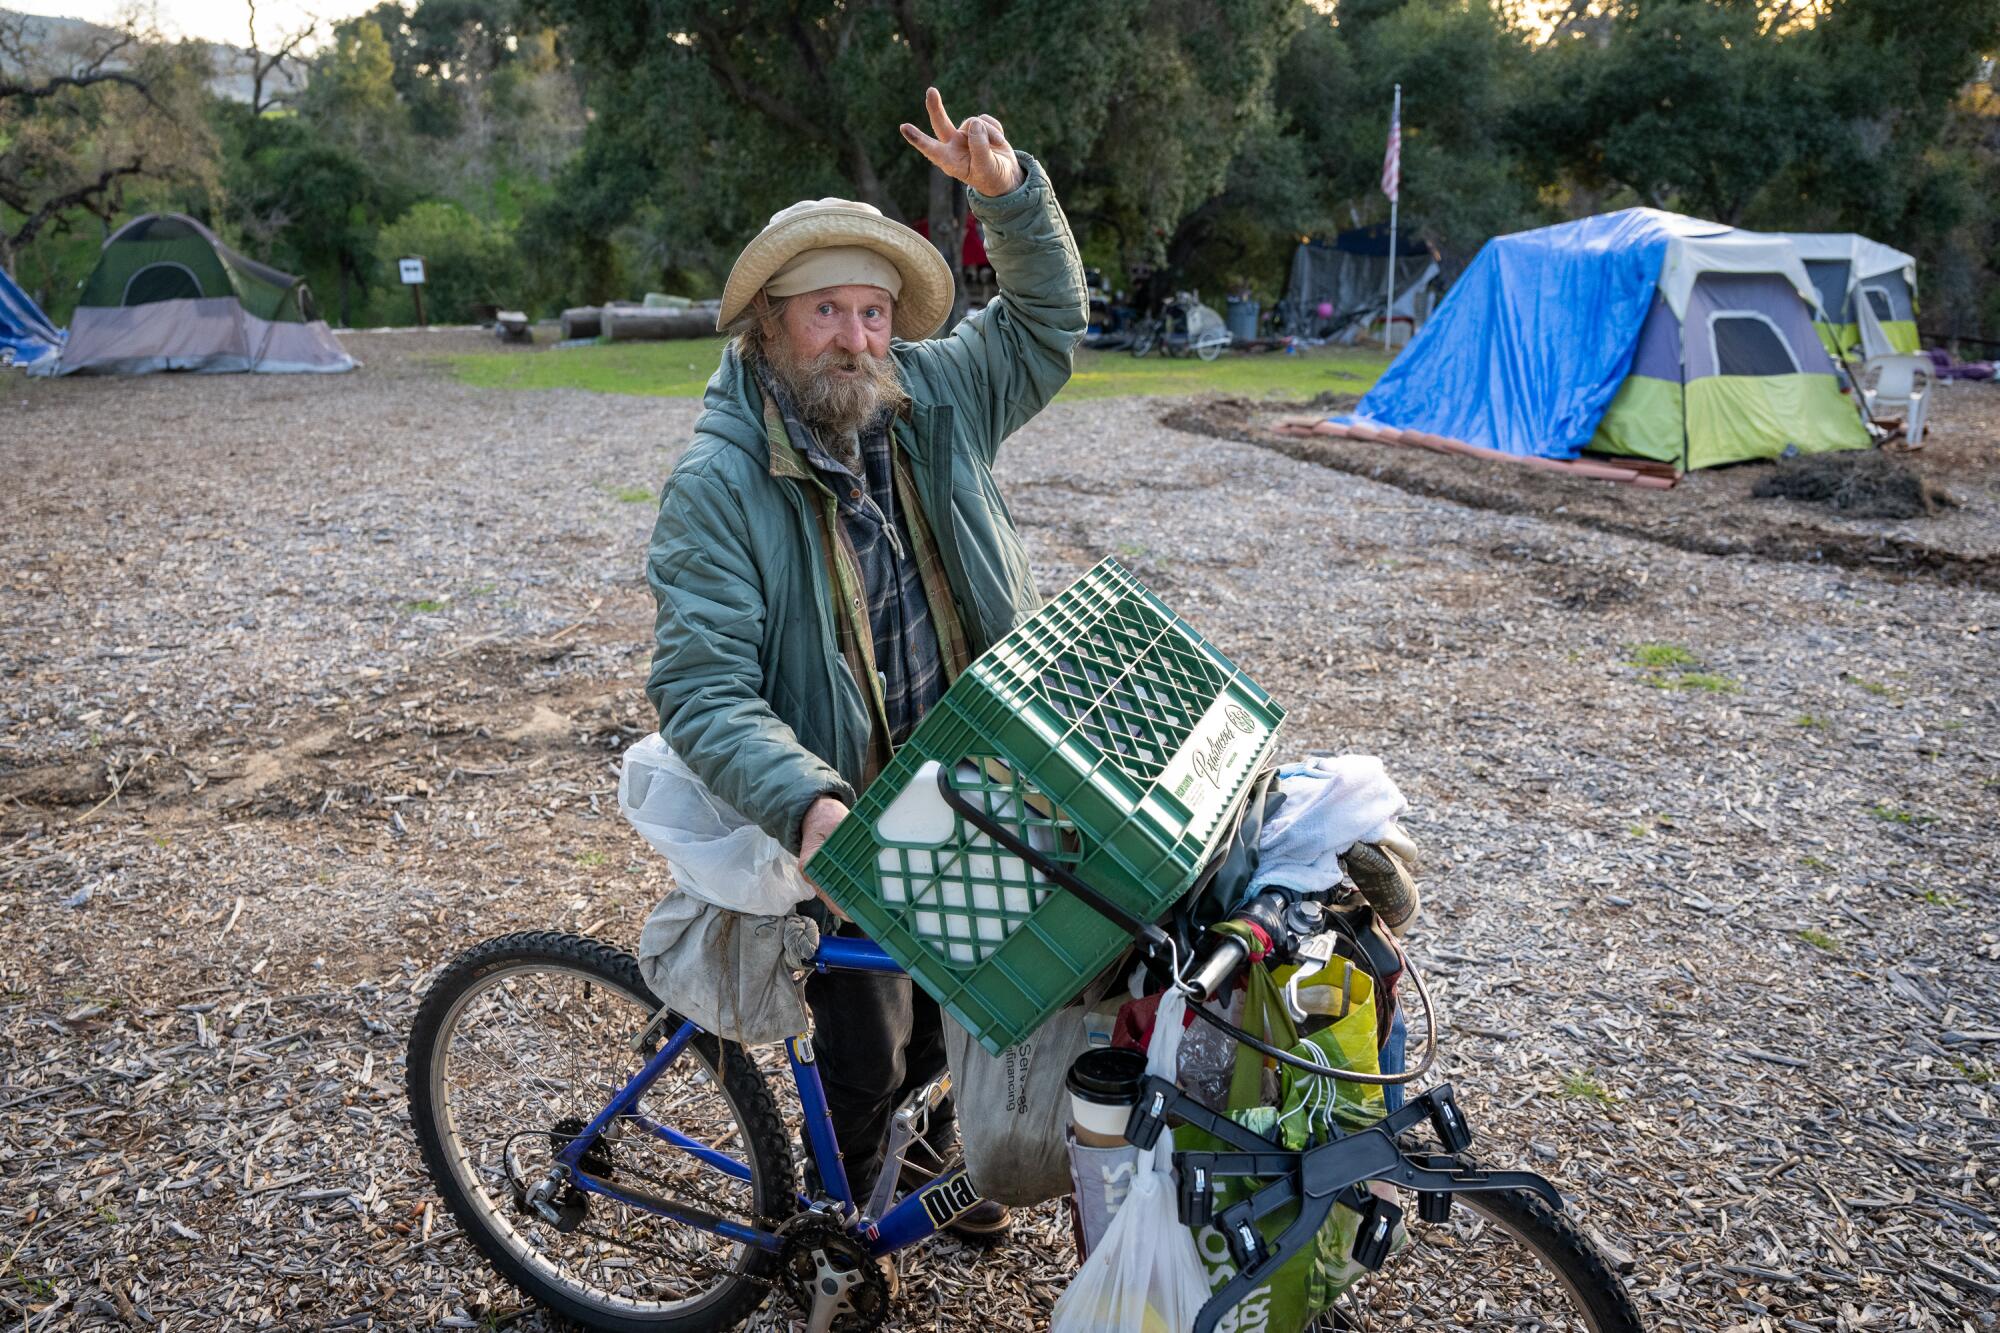 A homeless man on a bike loaded with plastic bags gives the peace sign.